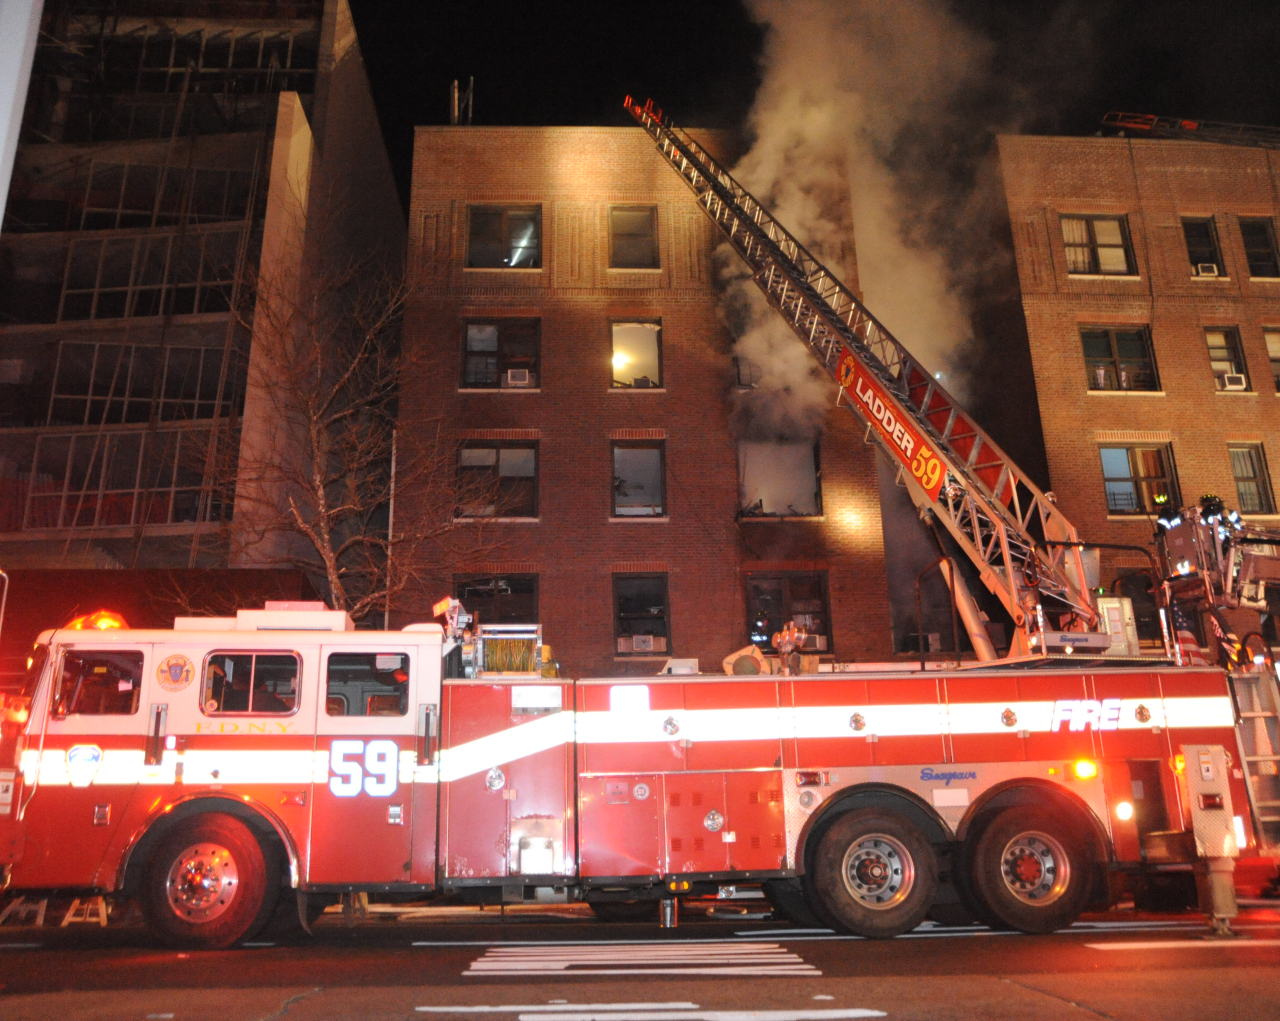 FDNY Ladder 59 responding to a fire responding to a fire in Manhattan, 2013.